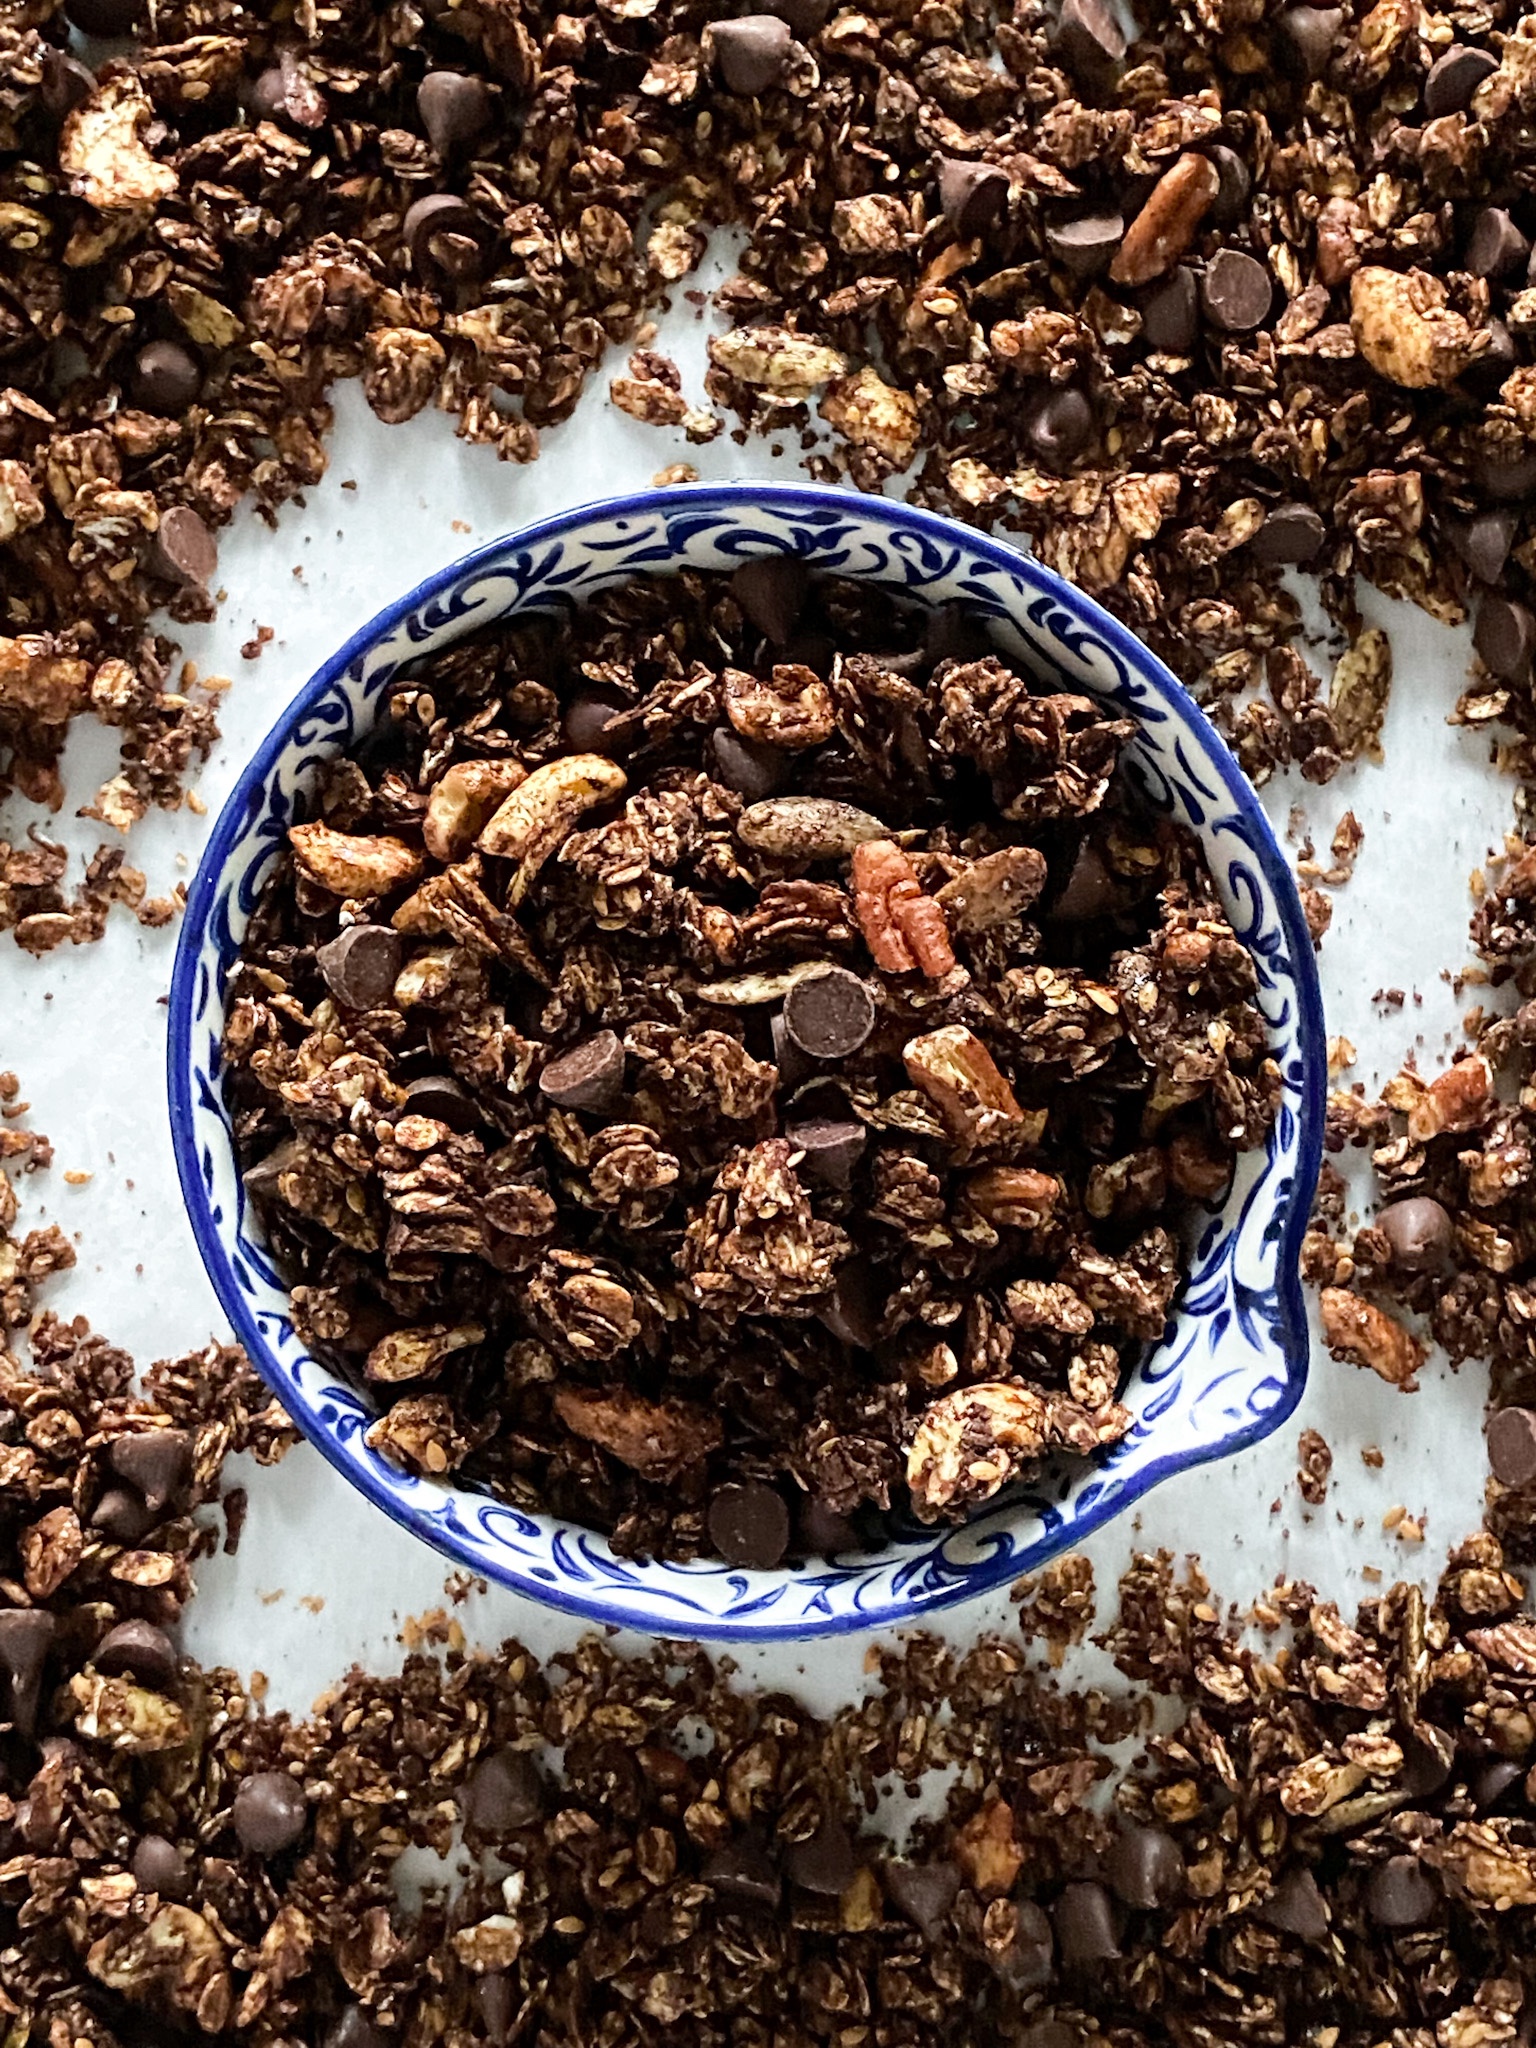 A blue and white bowl is filled with chocolate granola, which also spills onto the white surface.